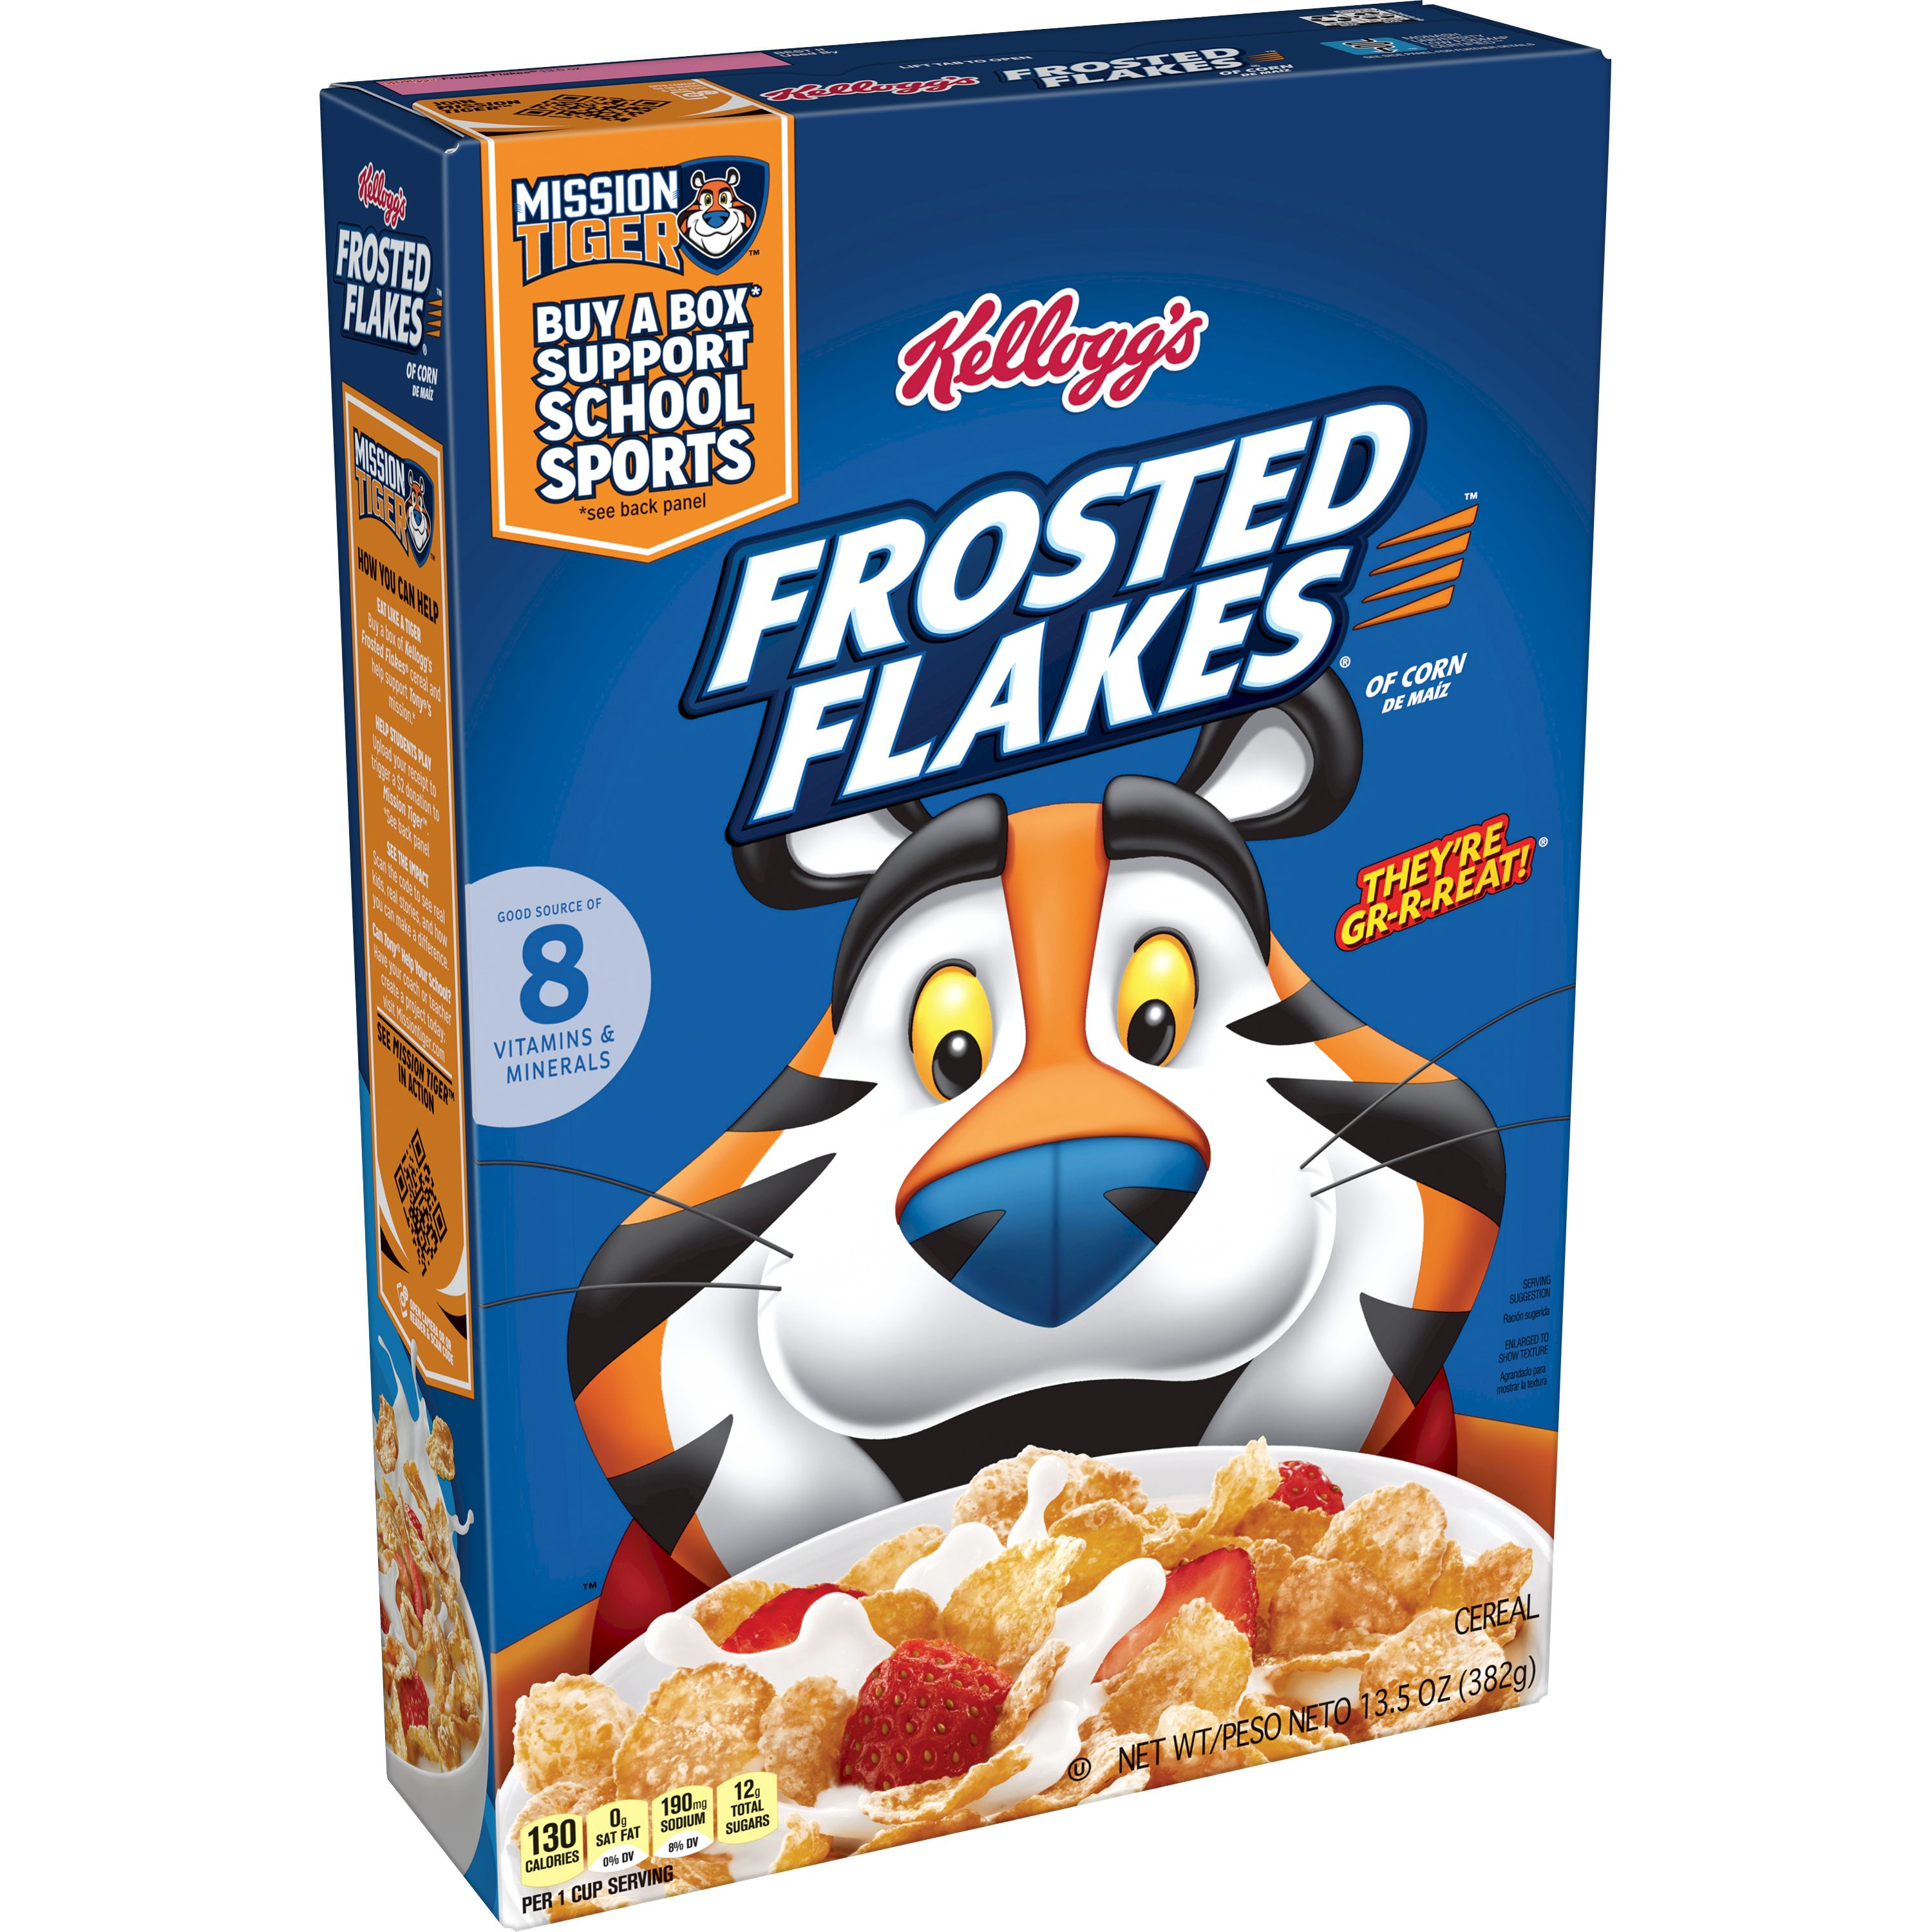 Frosted Flakes - Simple English Wikipedia, the free encyclopedia